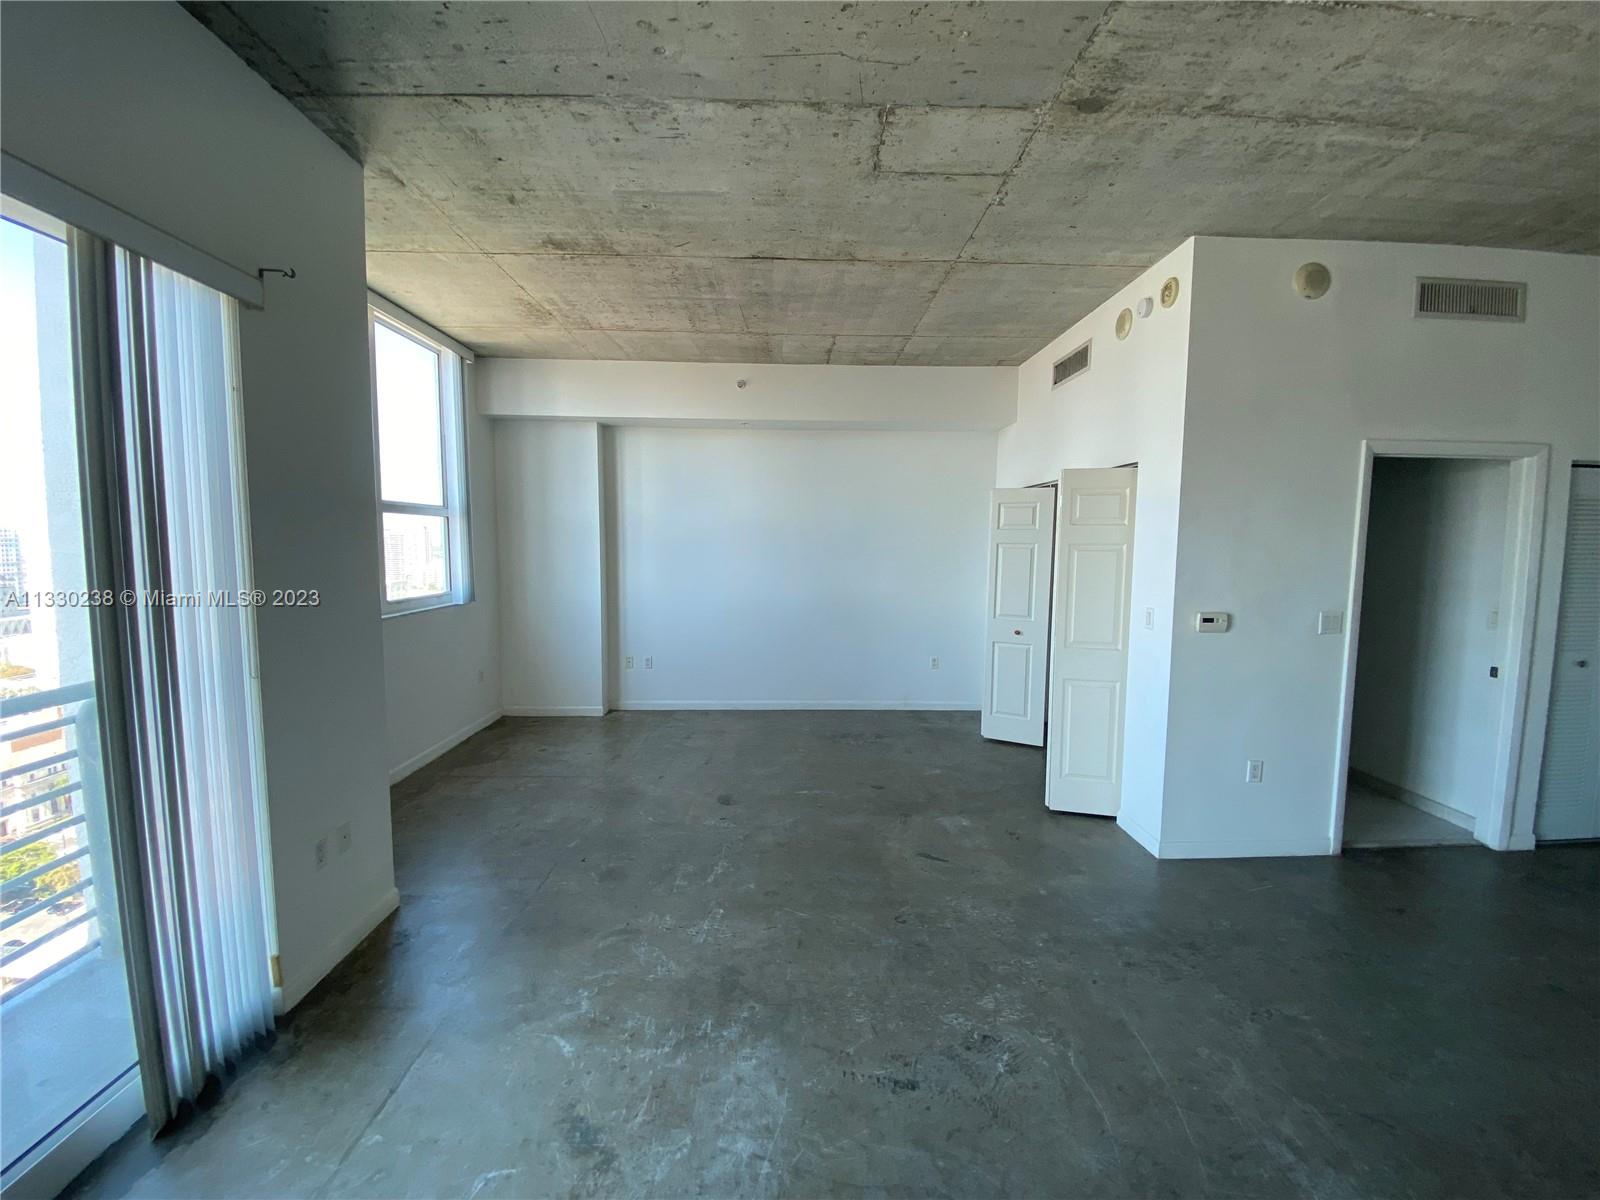 a view of empty room with windows